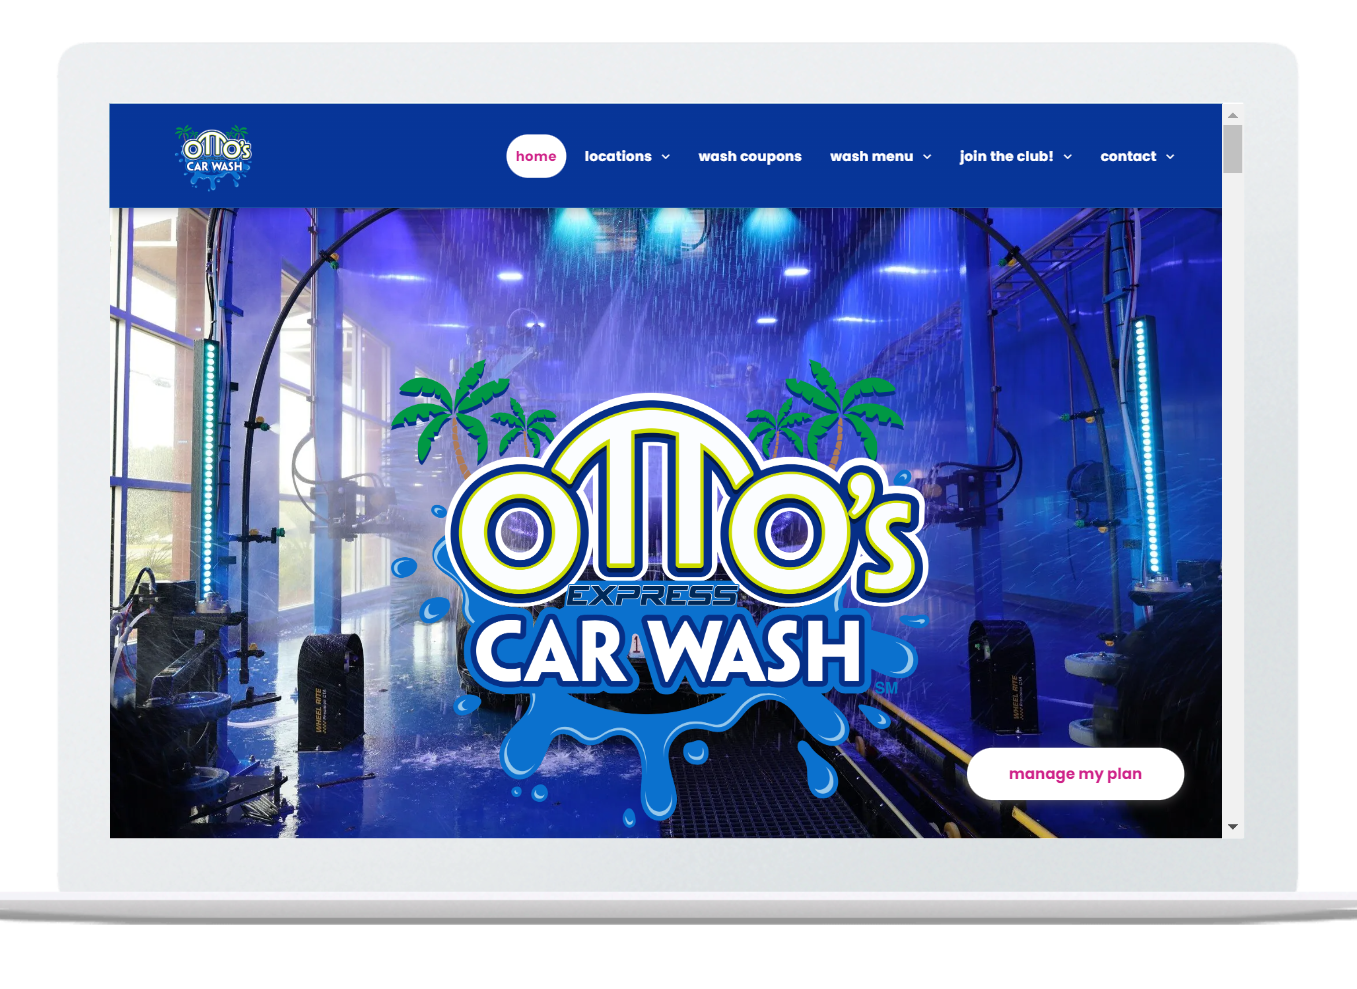 Otto's carwash - their carwash websites made by OhmCo, the best carwash websites in the wash and water treatment industry